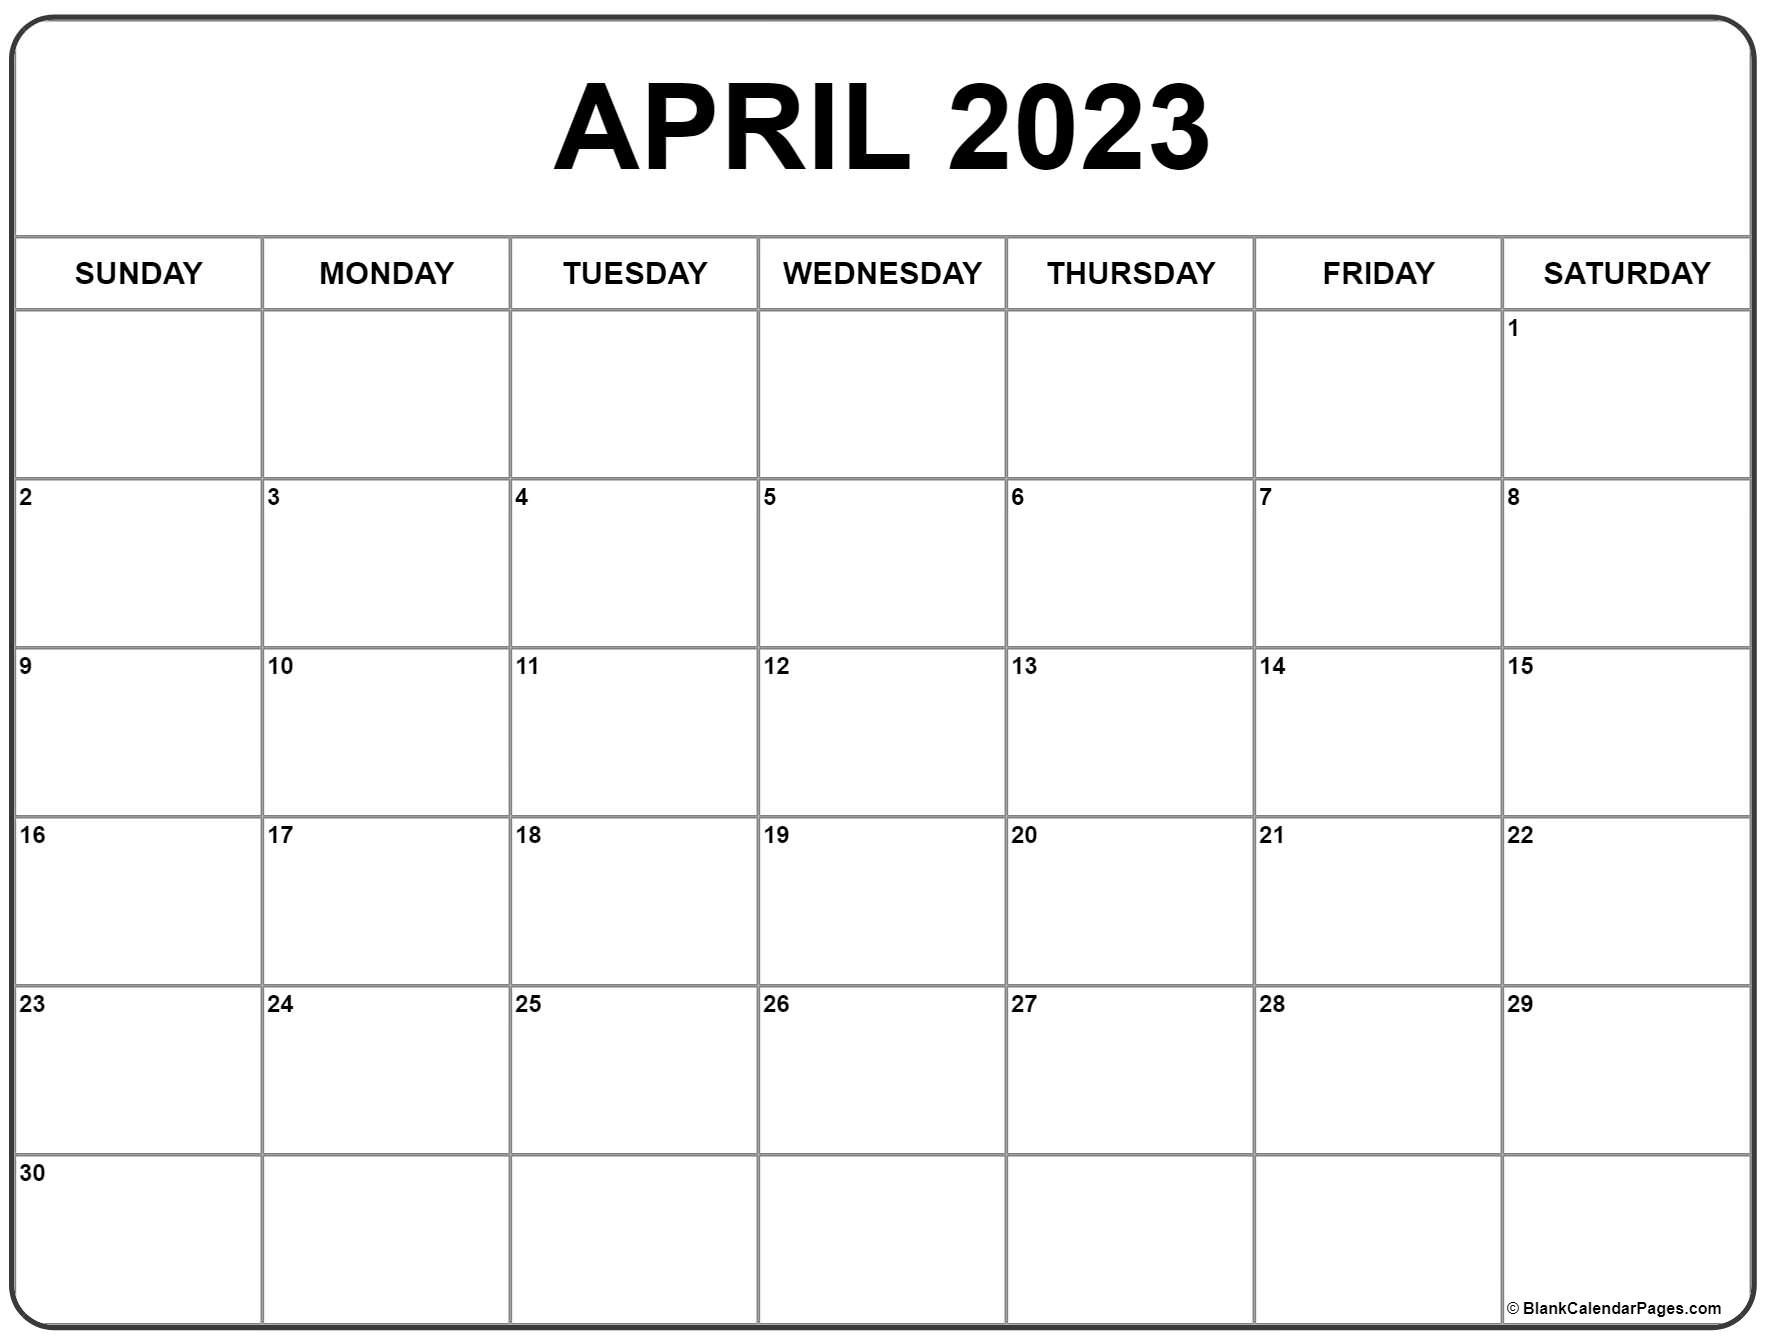 Get How Many Days In April 2023